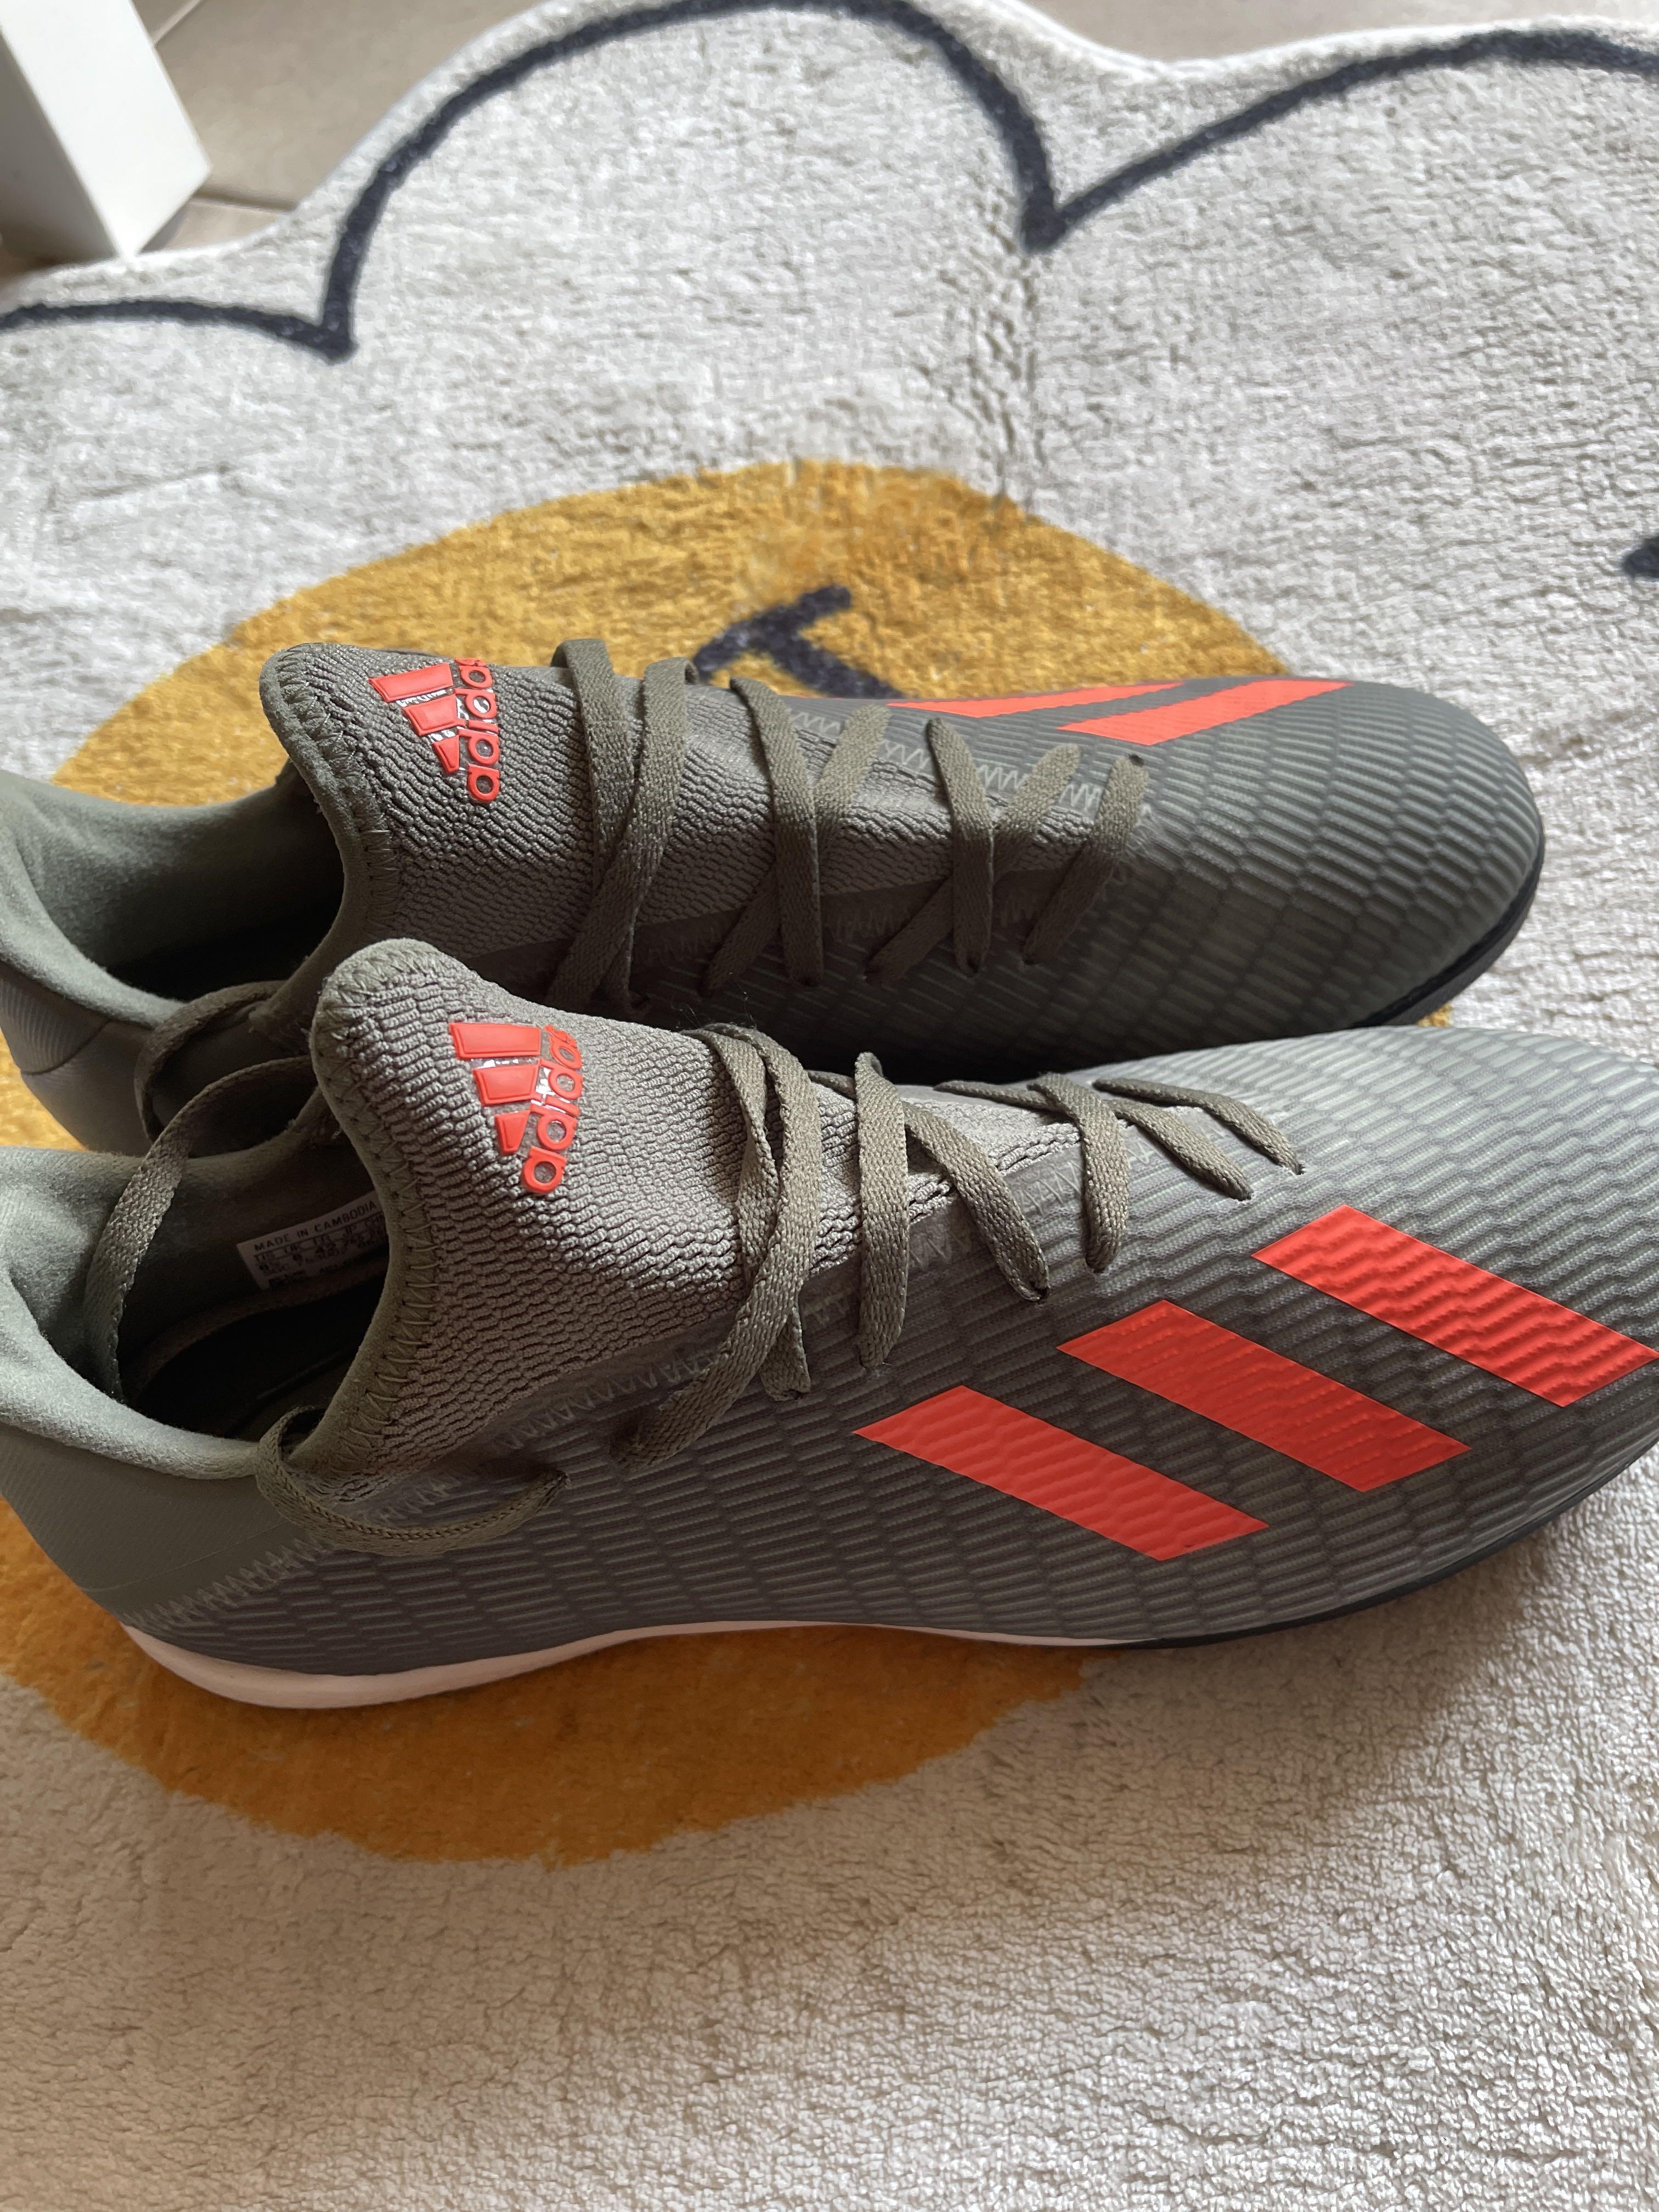 Adidas X 19.3 Boots, Men's Fashion, Footwear, Boots Carousell